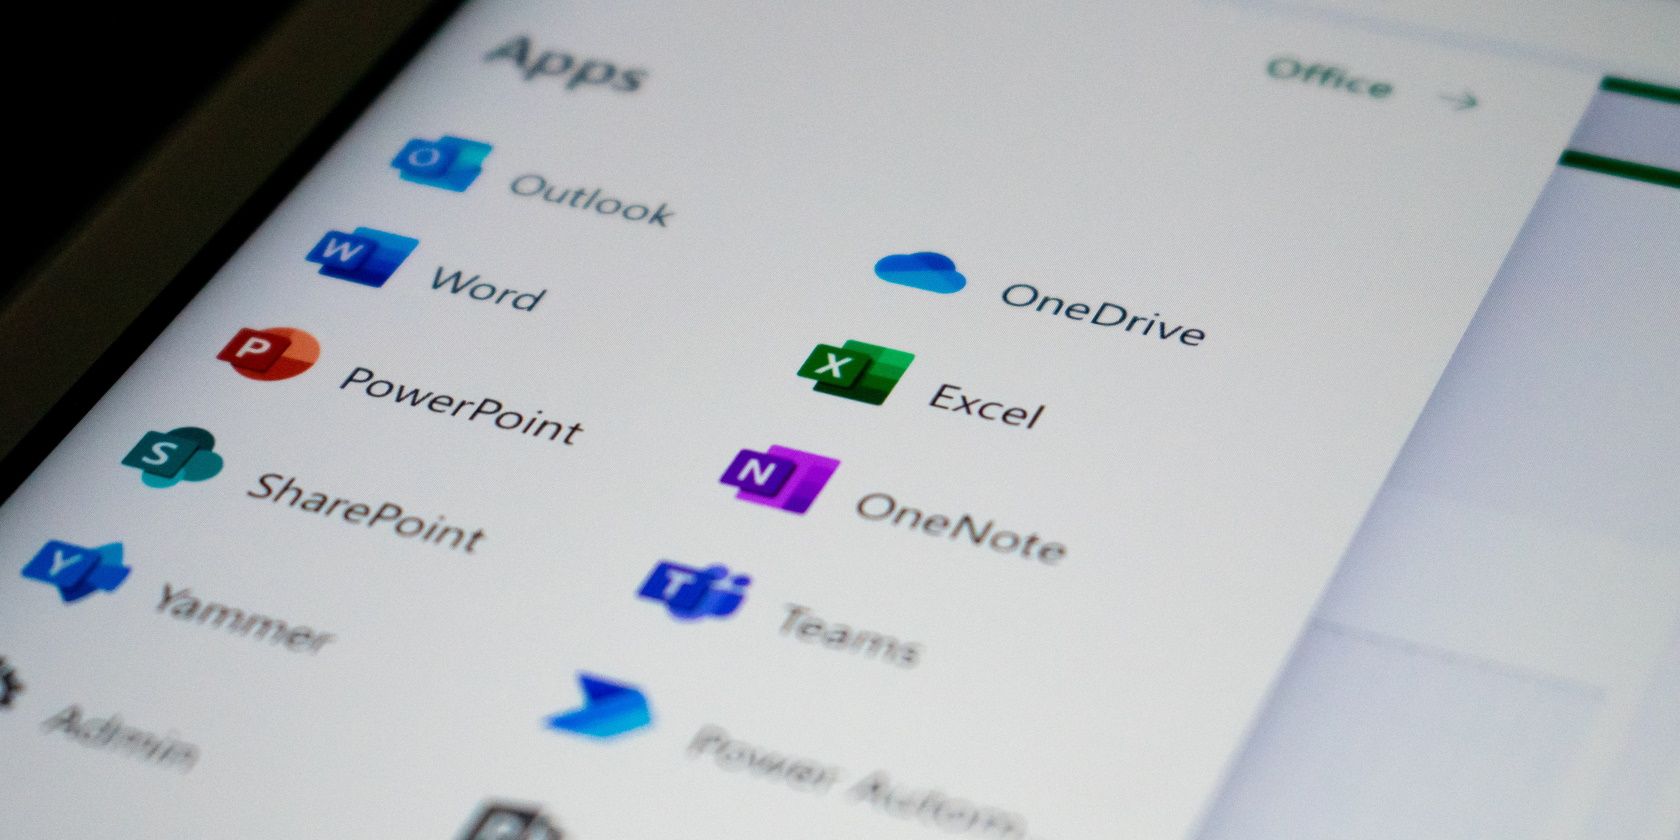 Menu with list of Microsoft apps including OneNote